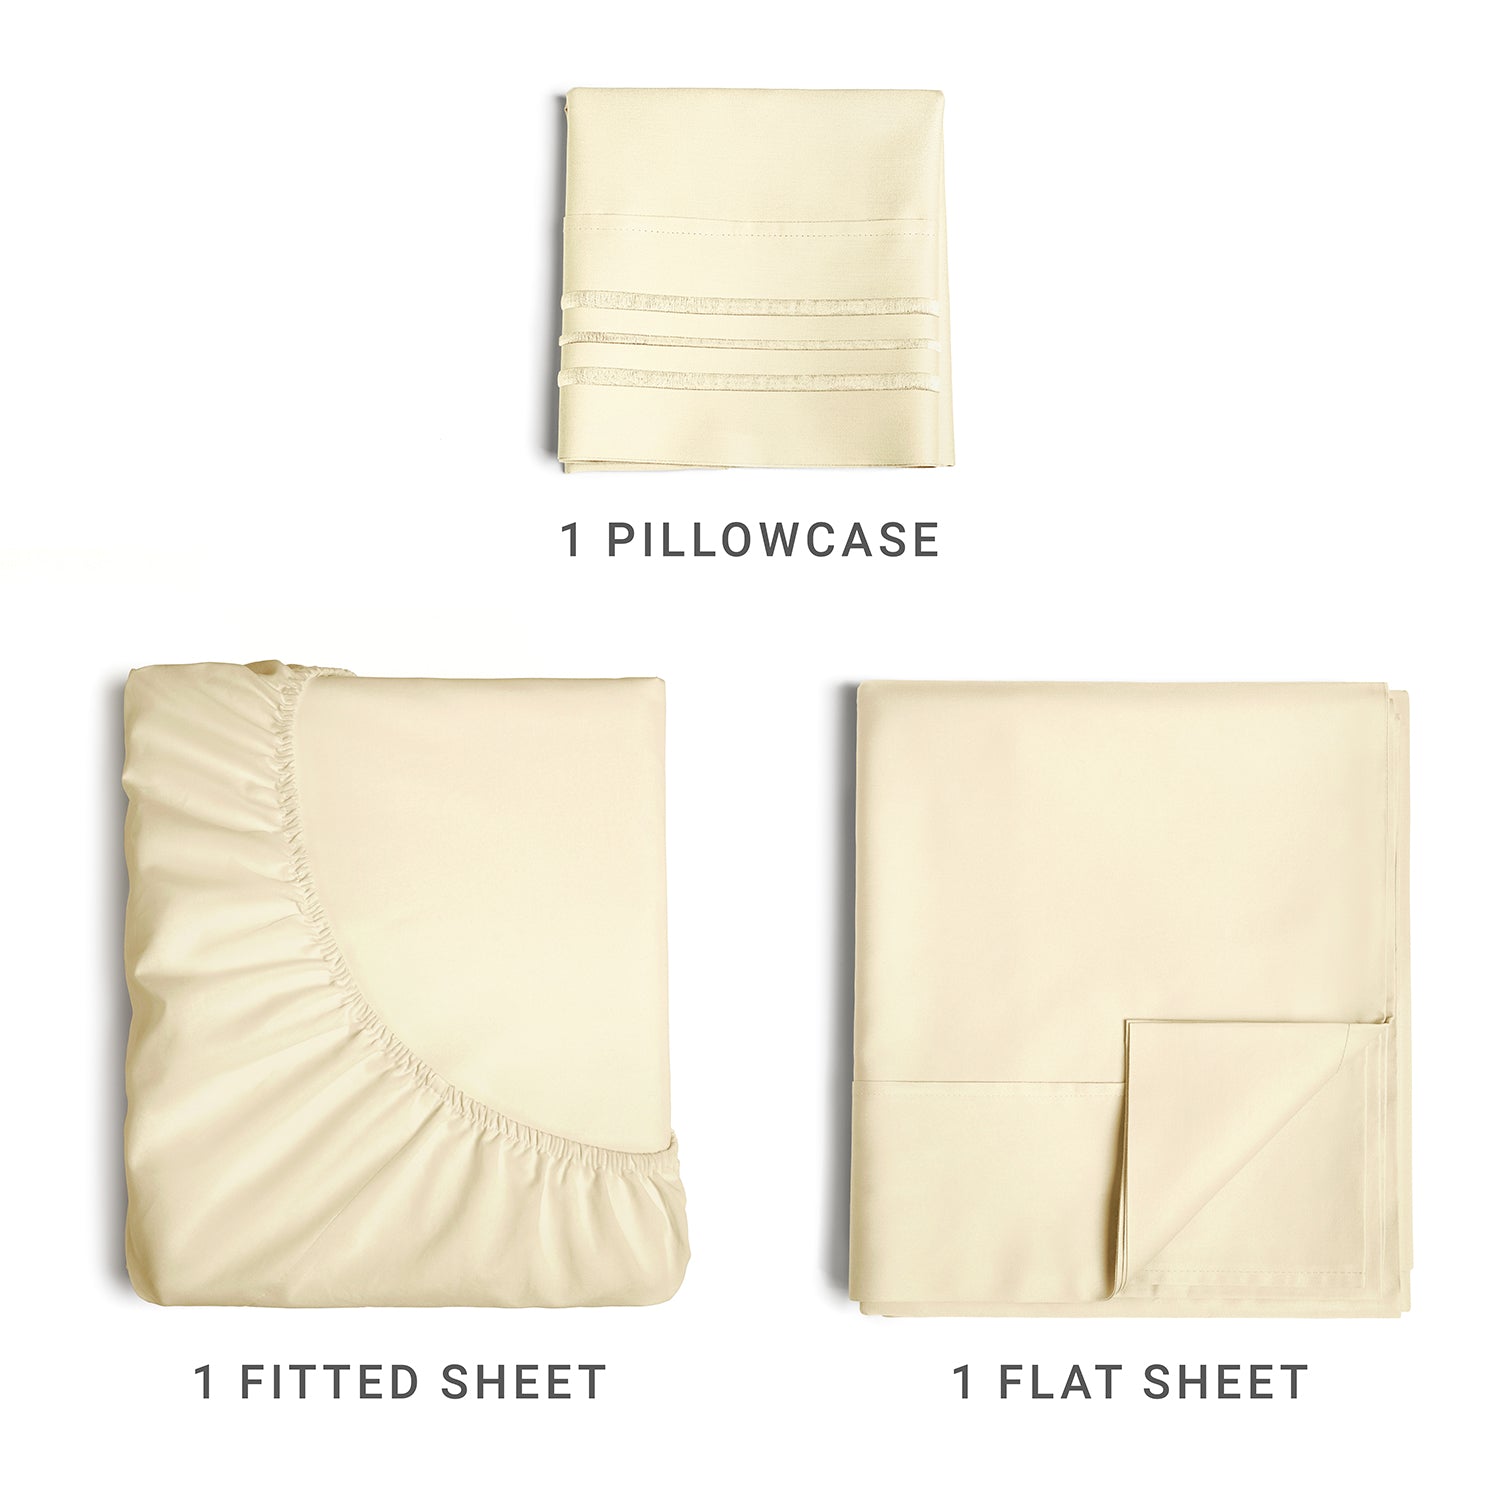 tes 4pc Sheet Set New Colors/Patterns - Off White